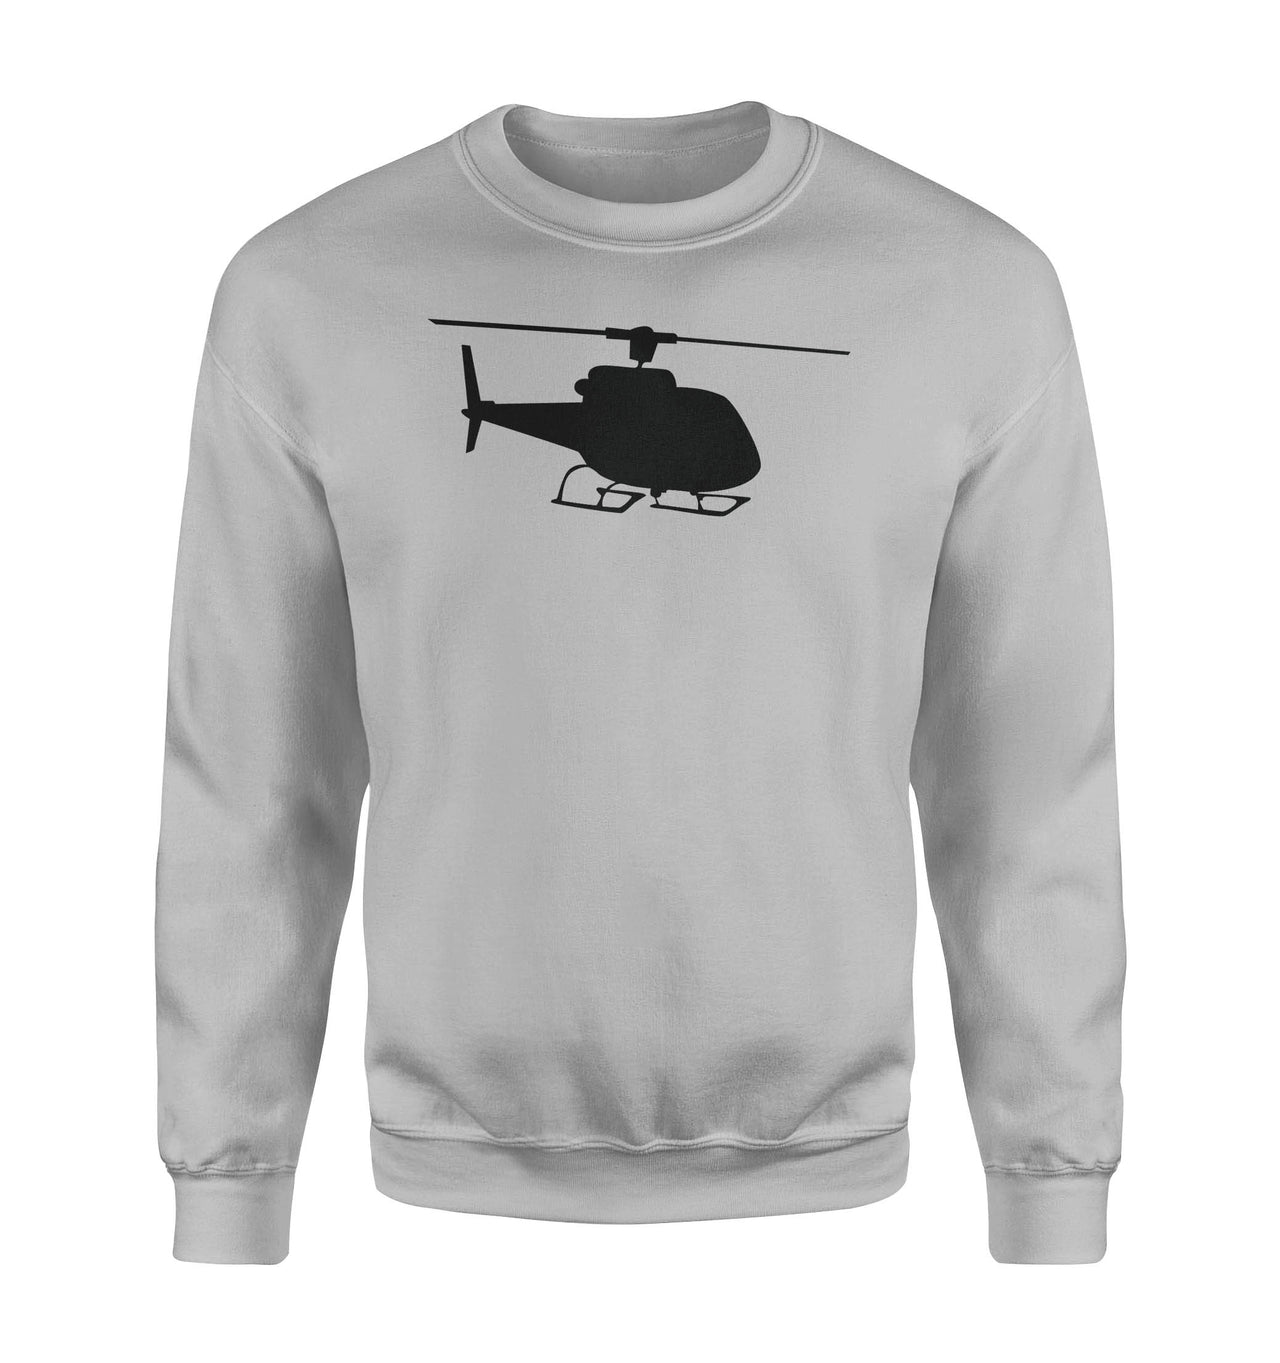 Helicopter Silhouette Designed Sweatshirts